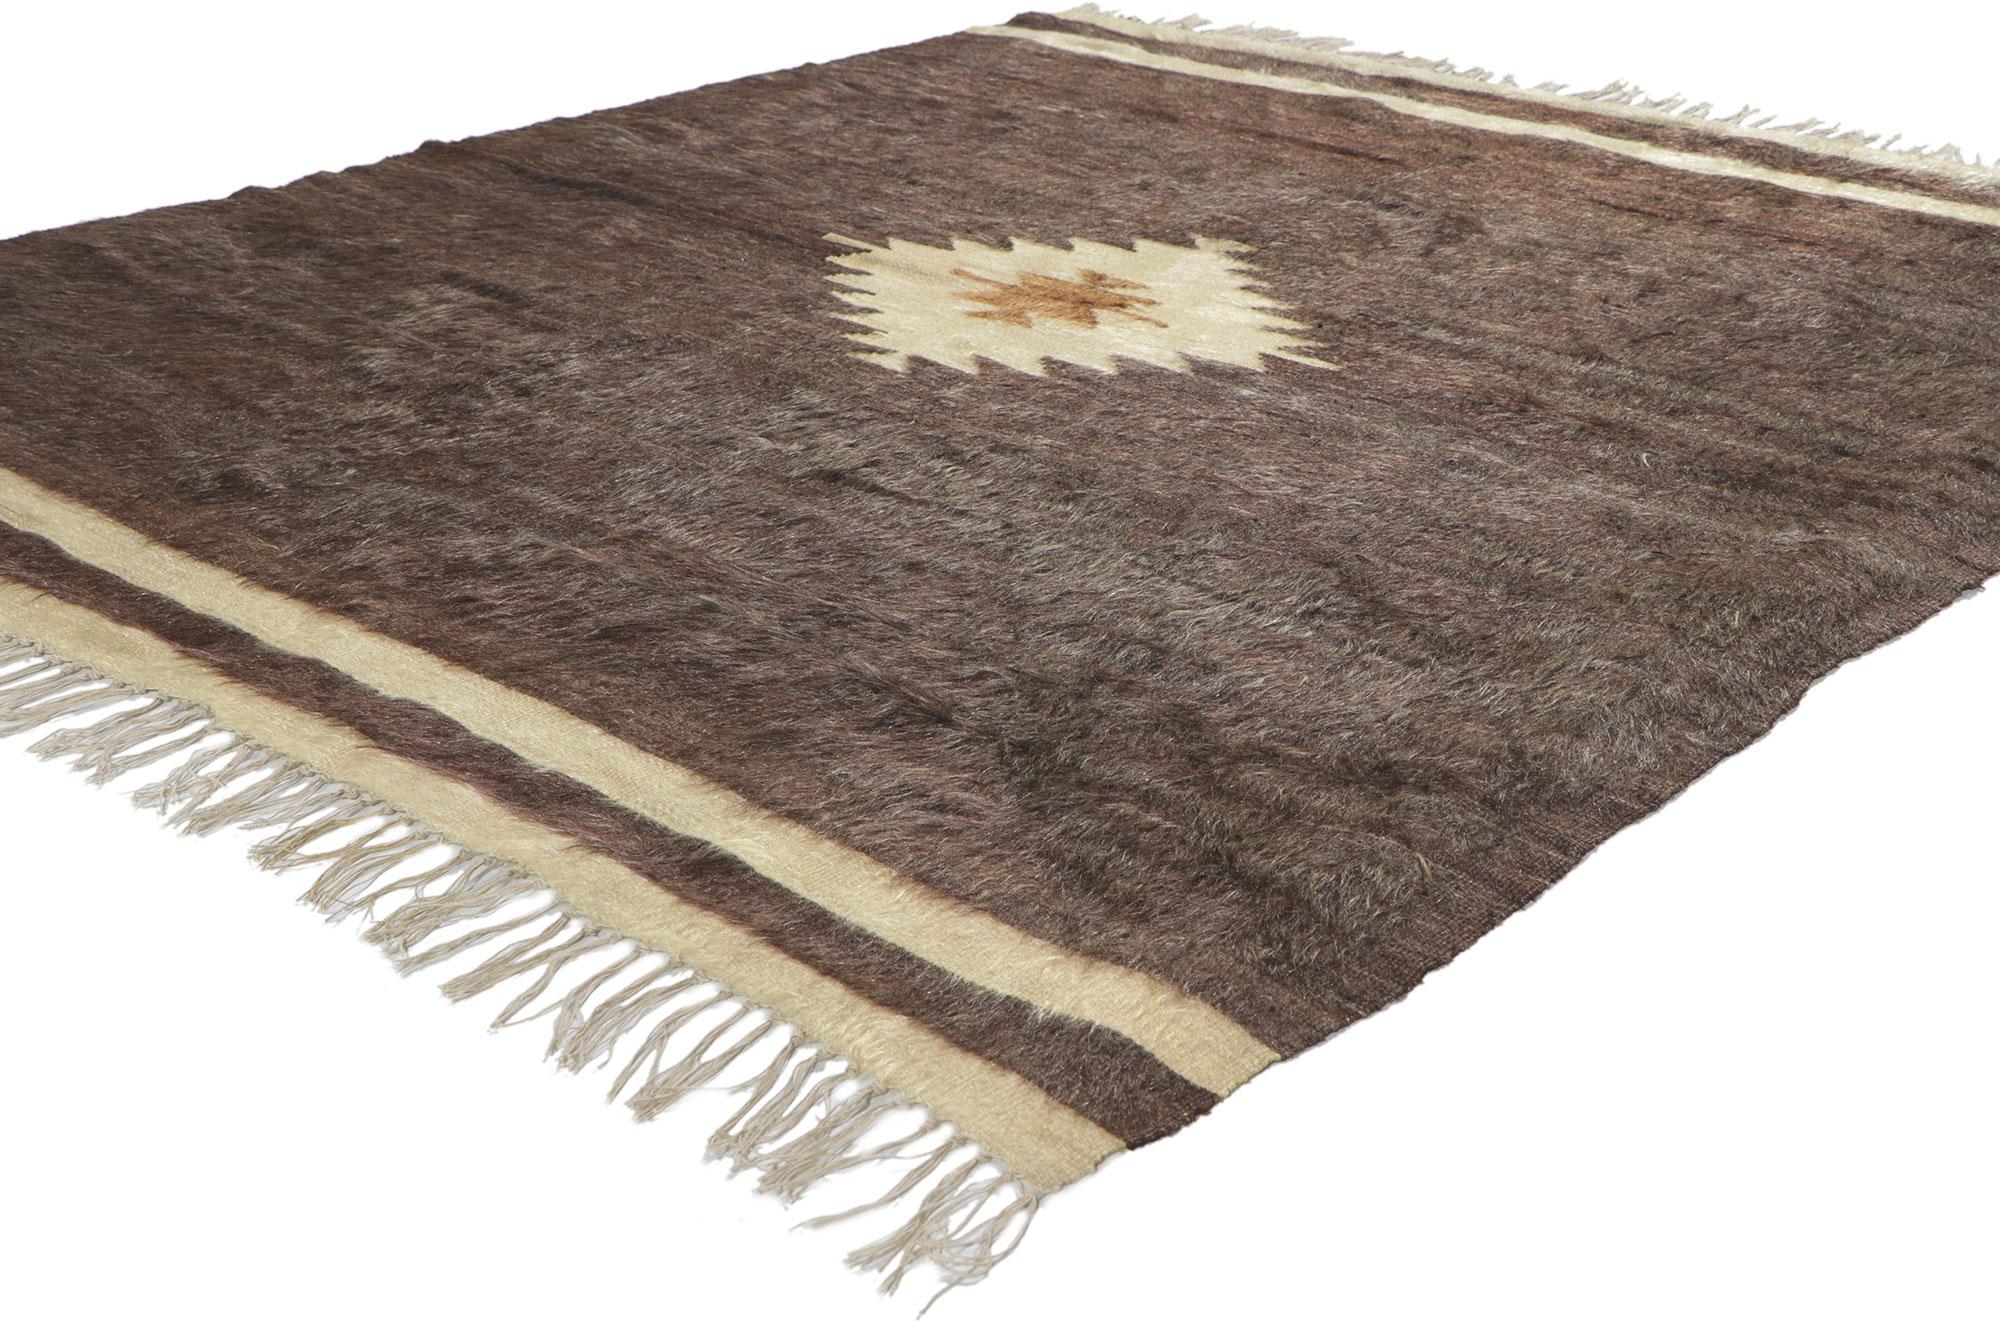 53833 Vintage Turkish Angora Wool Kilim blanket rug, 04'08 x 06'09?. With its shaggy pile, incredible detail and texture, this handwoven Turkish angora kilim rug is a captivating vision of woven beauty. The eye-catching geometric design and earthy